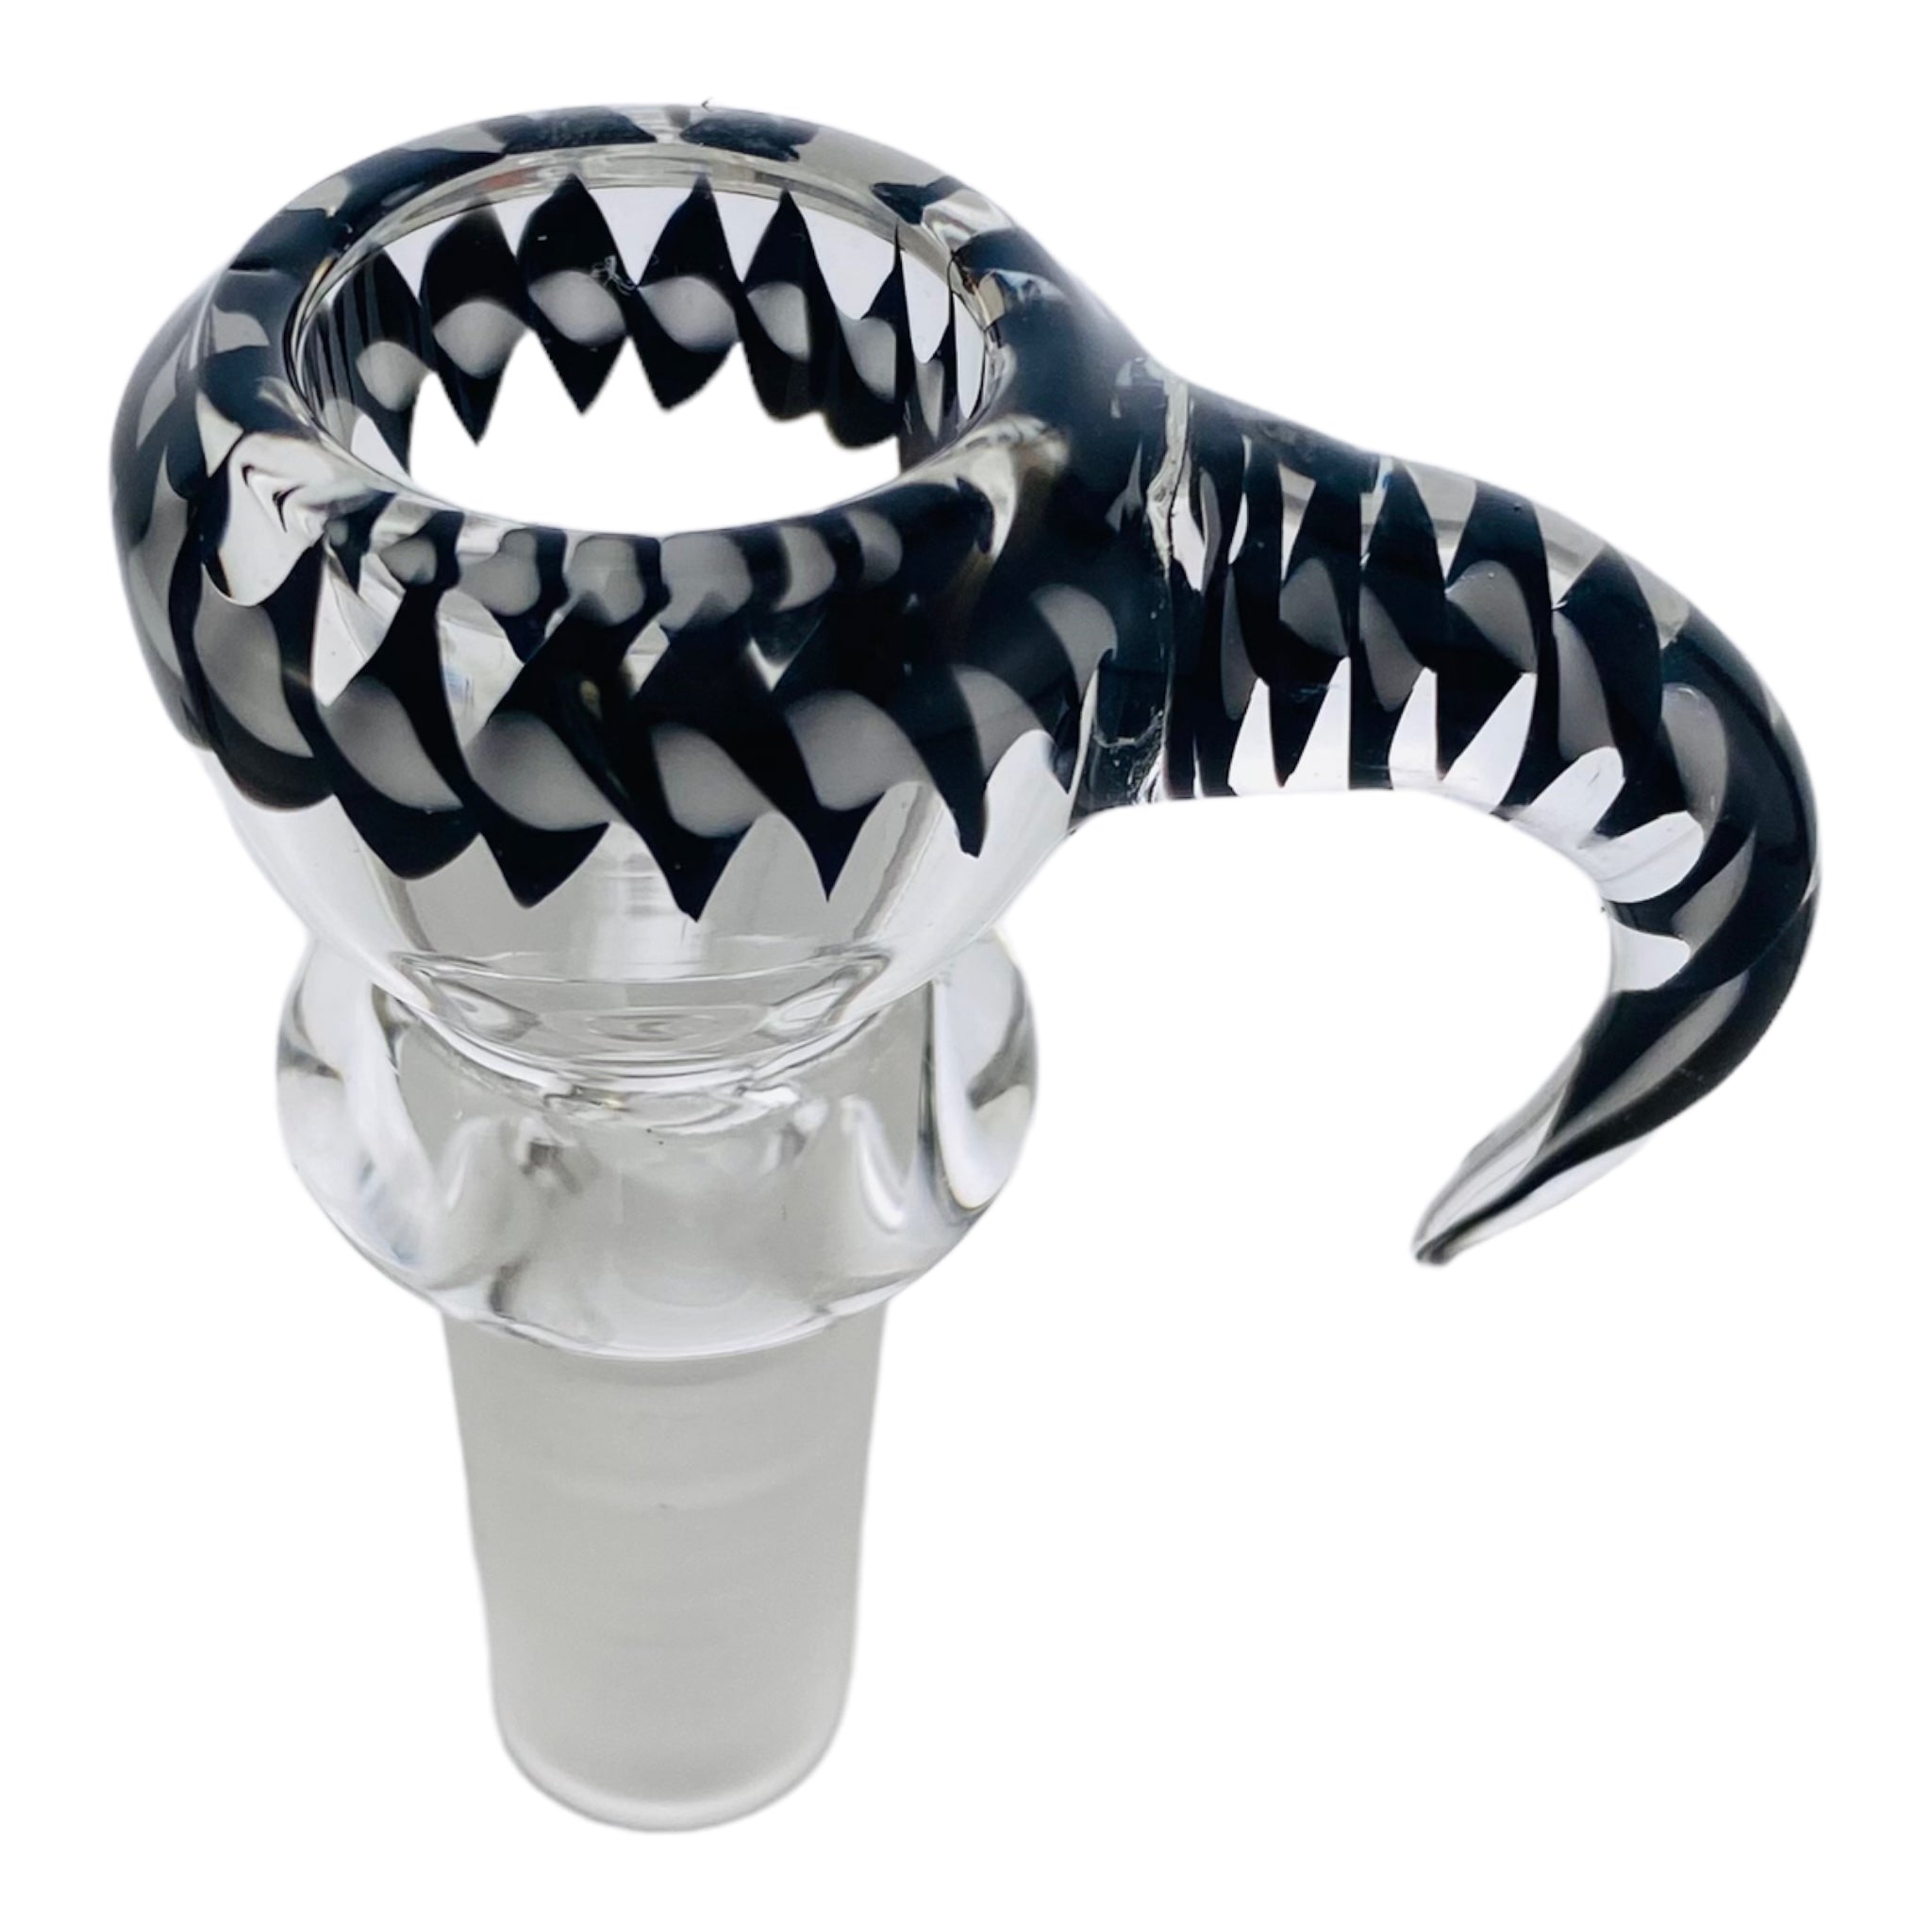 14mm Flower Bowl - Clear Funnel With Black Spiral Handle Bong Bowl Piece